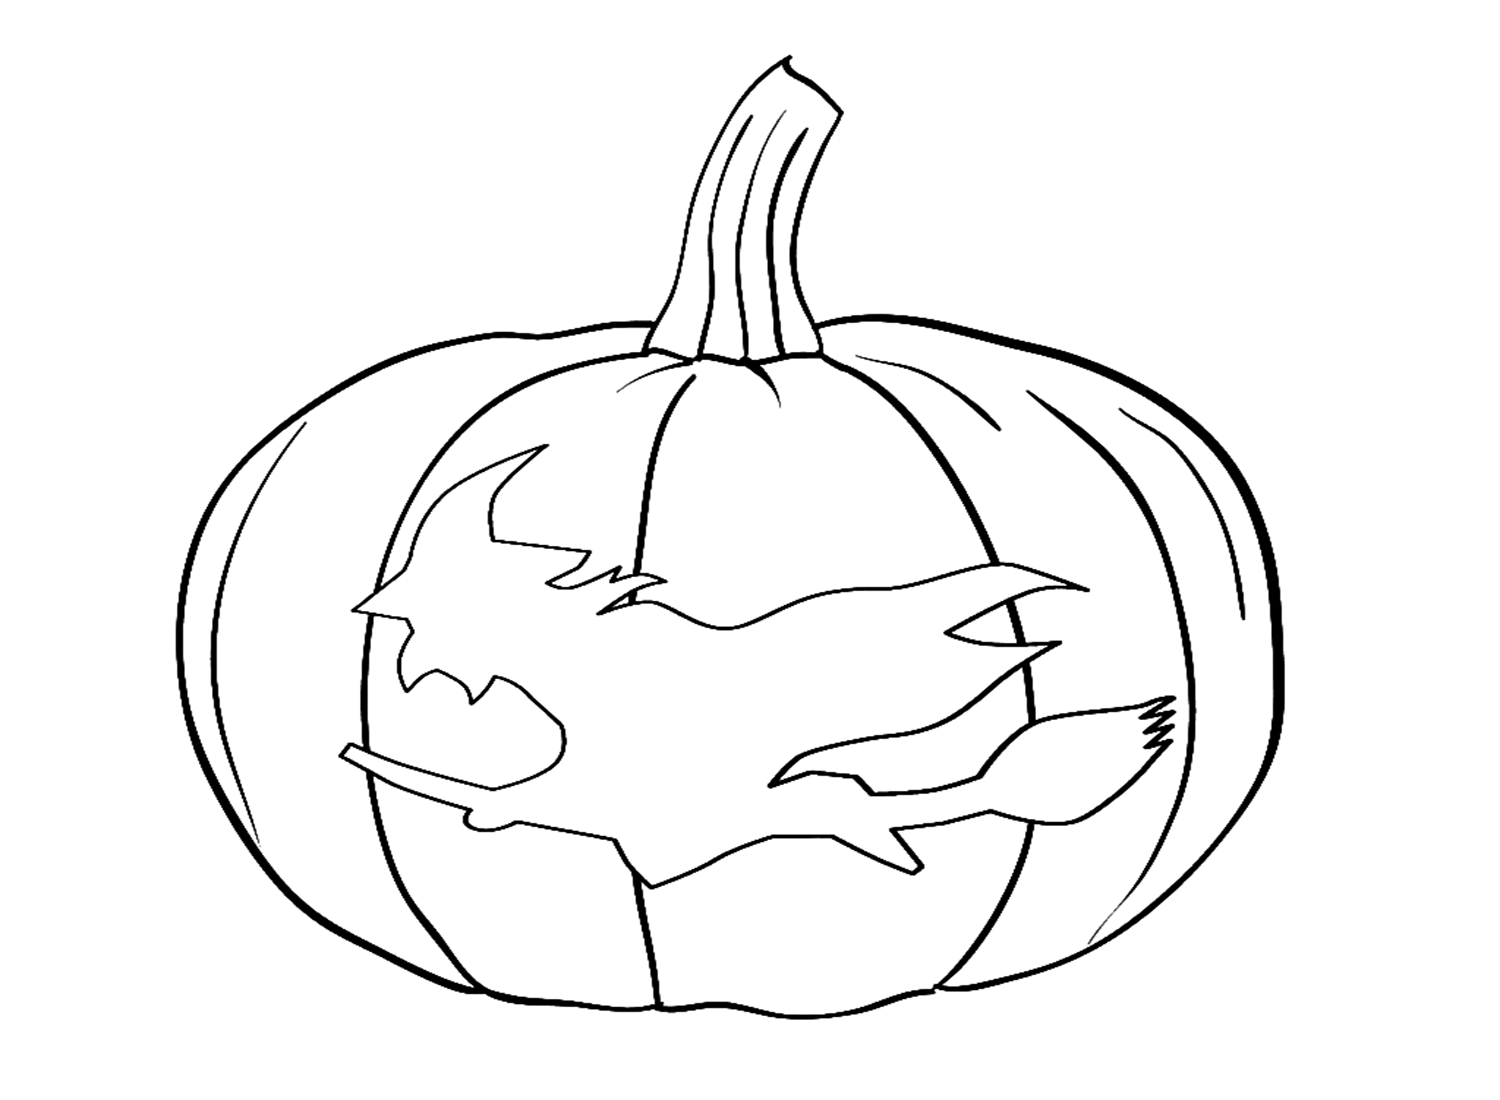 Engraved On Pumpkins The Image Of Witches Coloring Pages